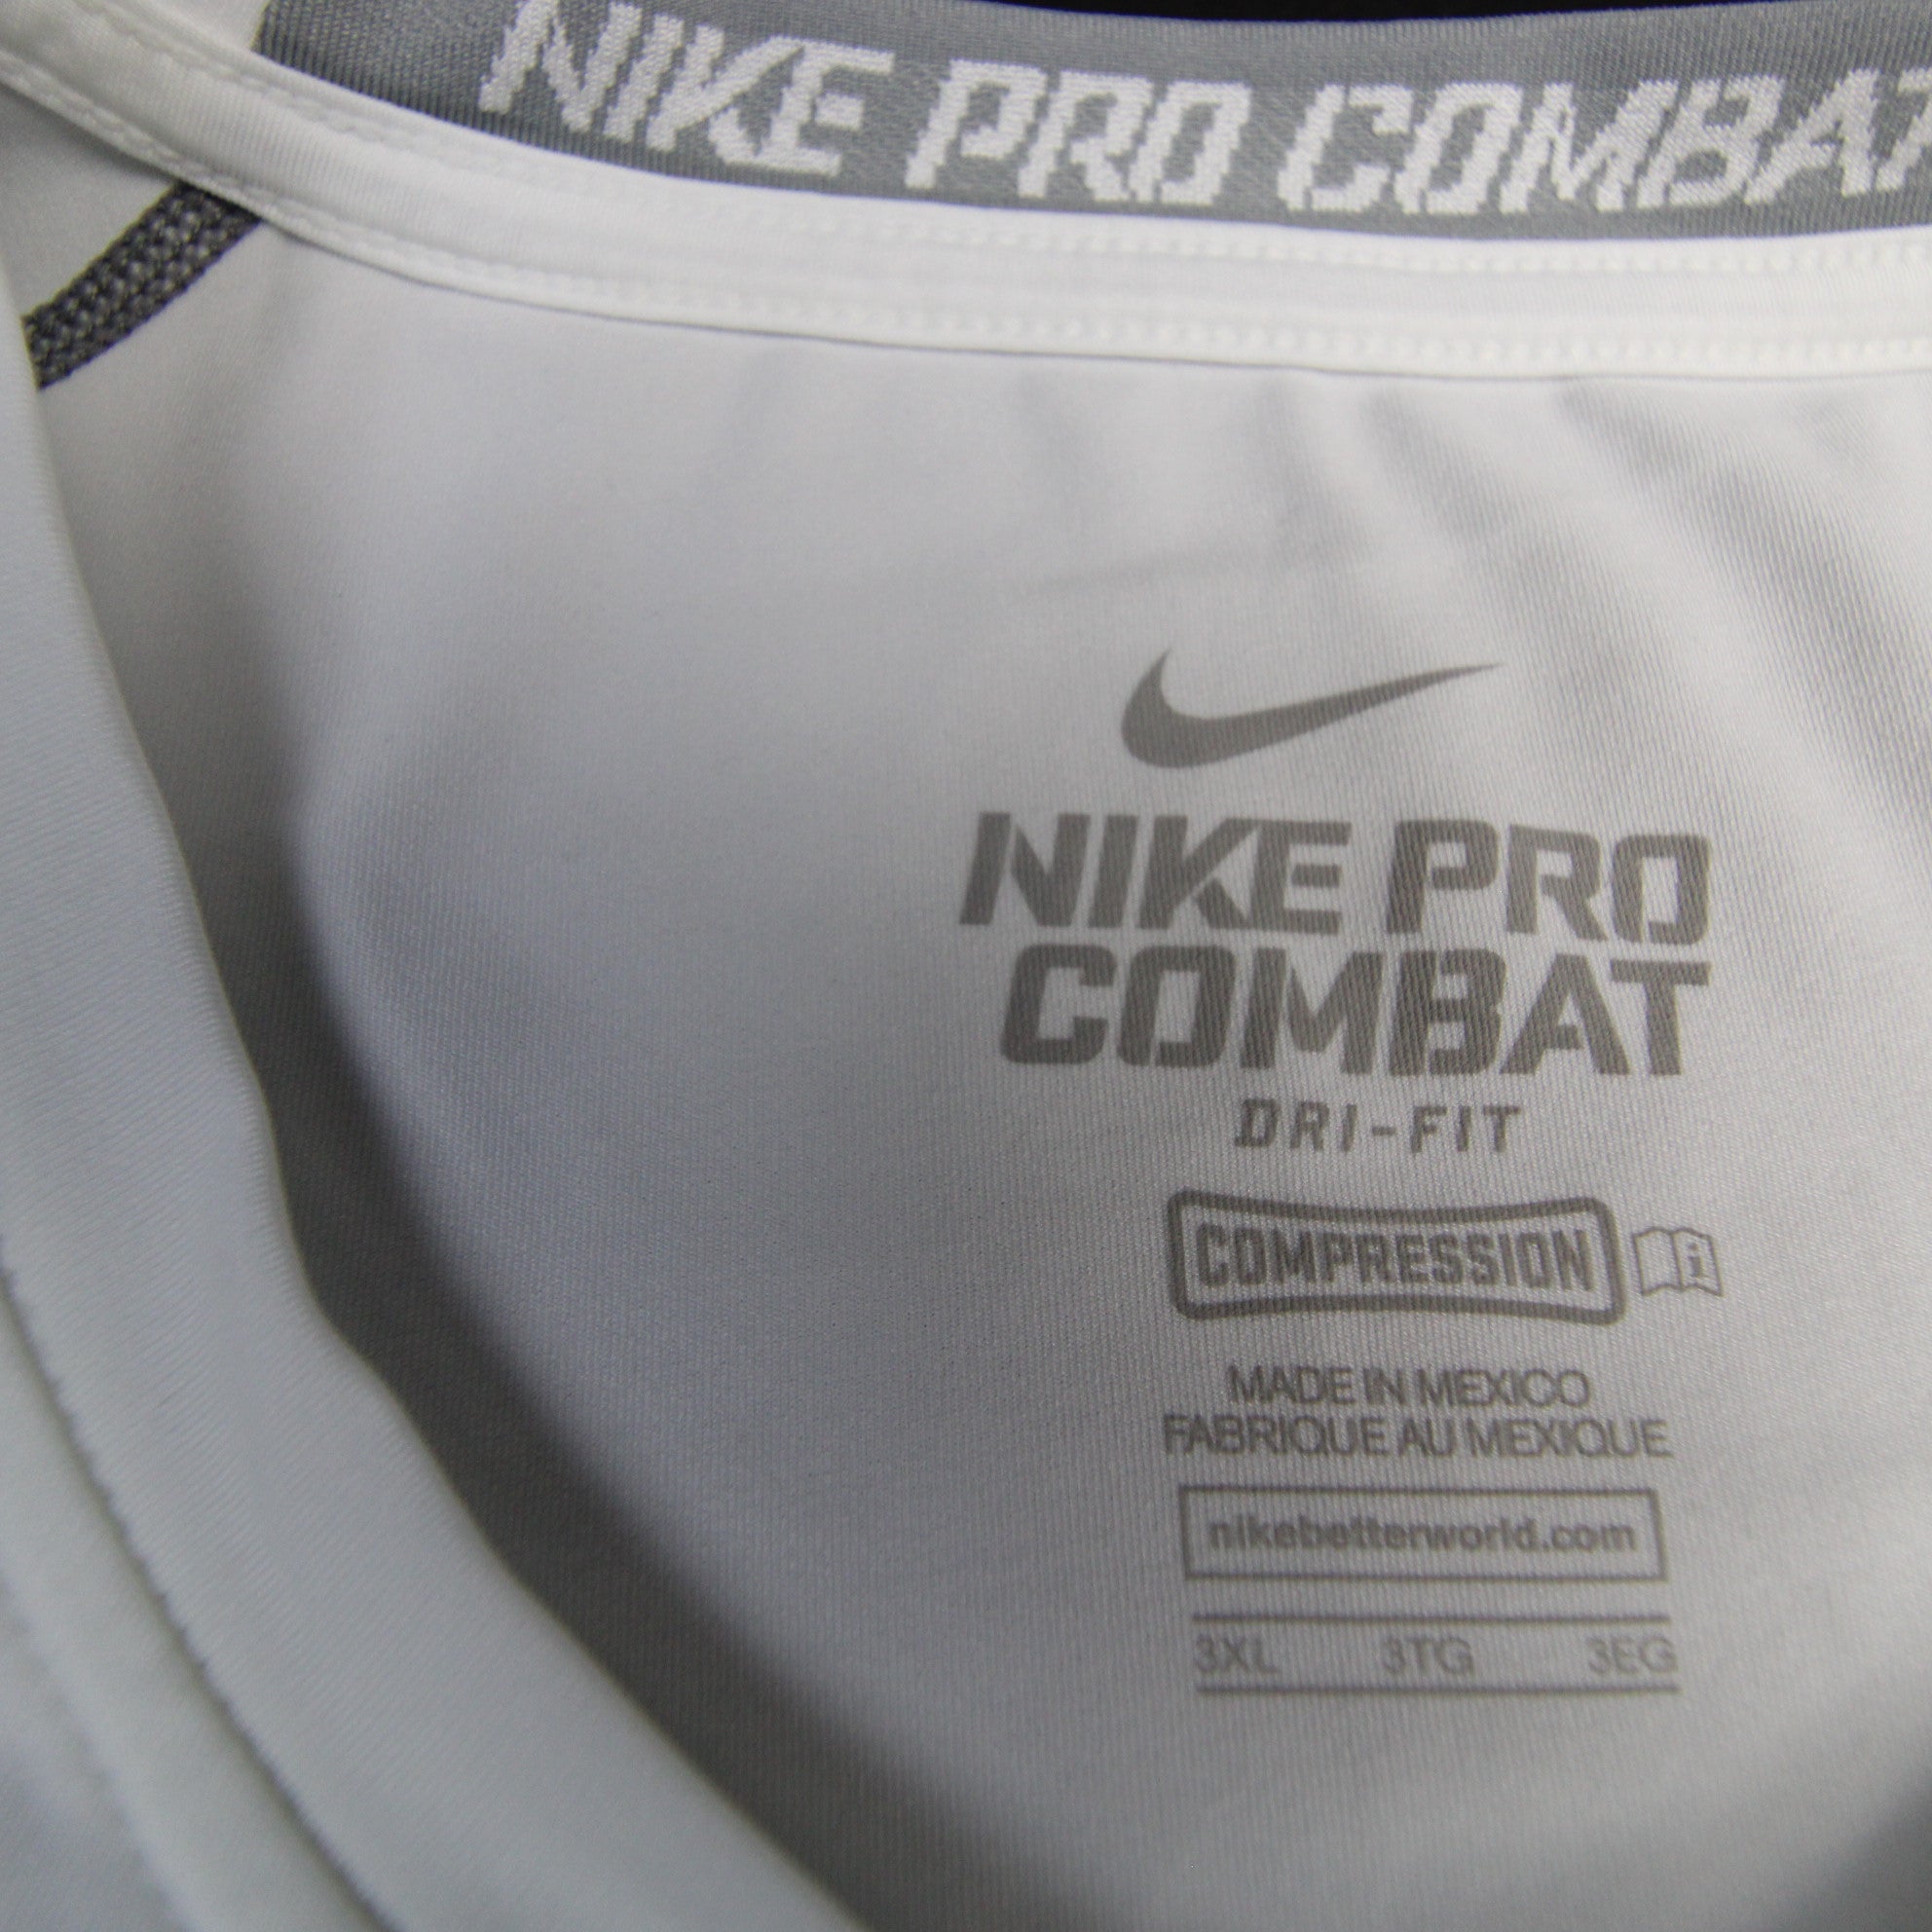 Nike Pro Combat Padded Compression Top Men's White/Gray New with